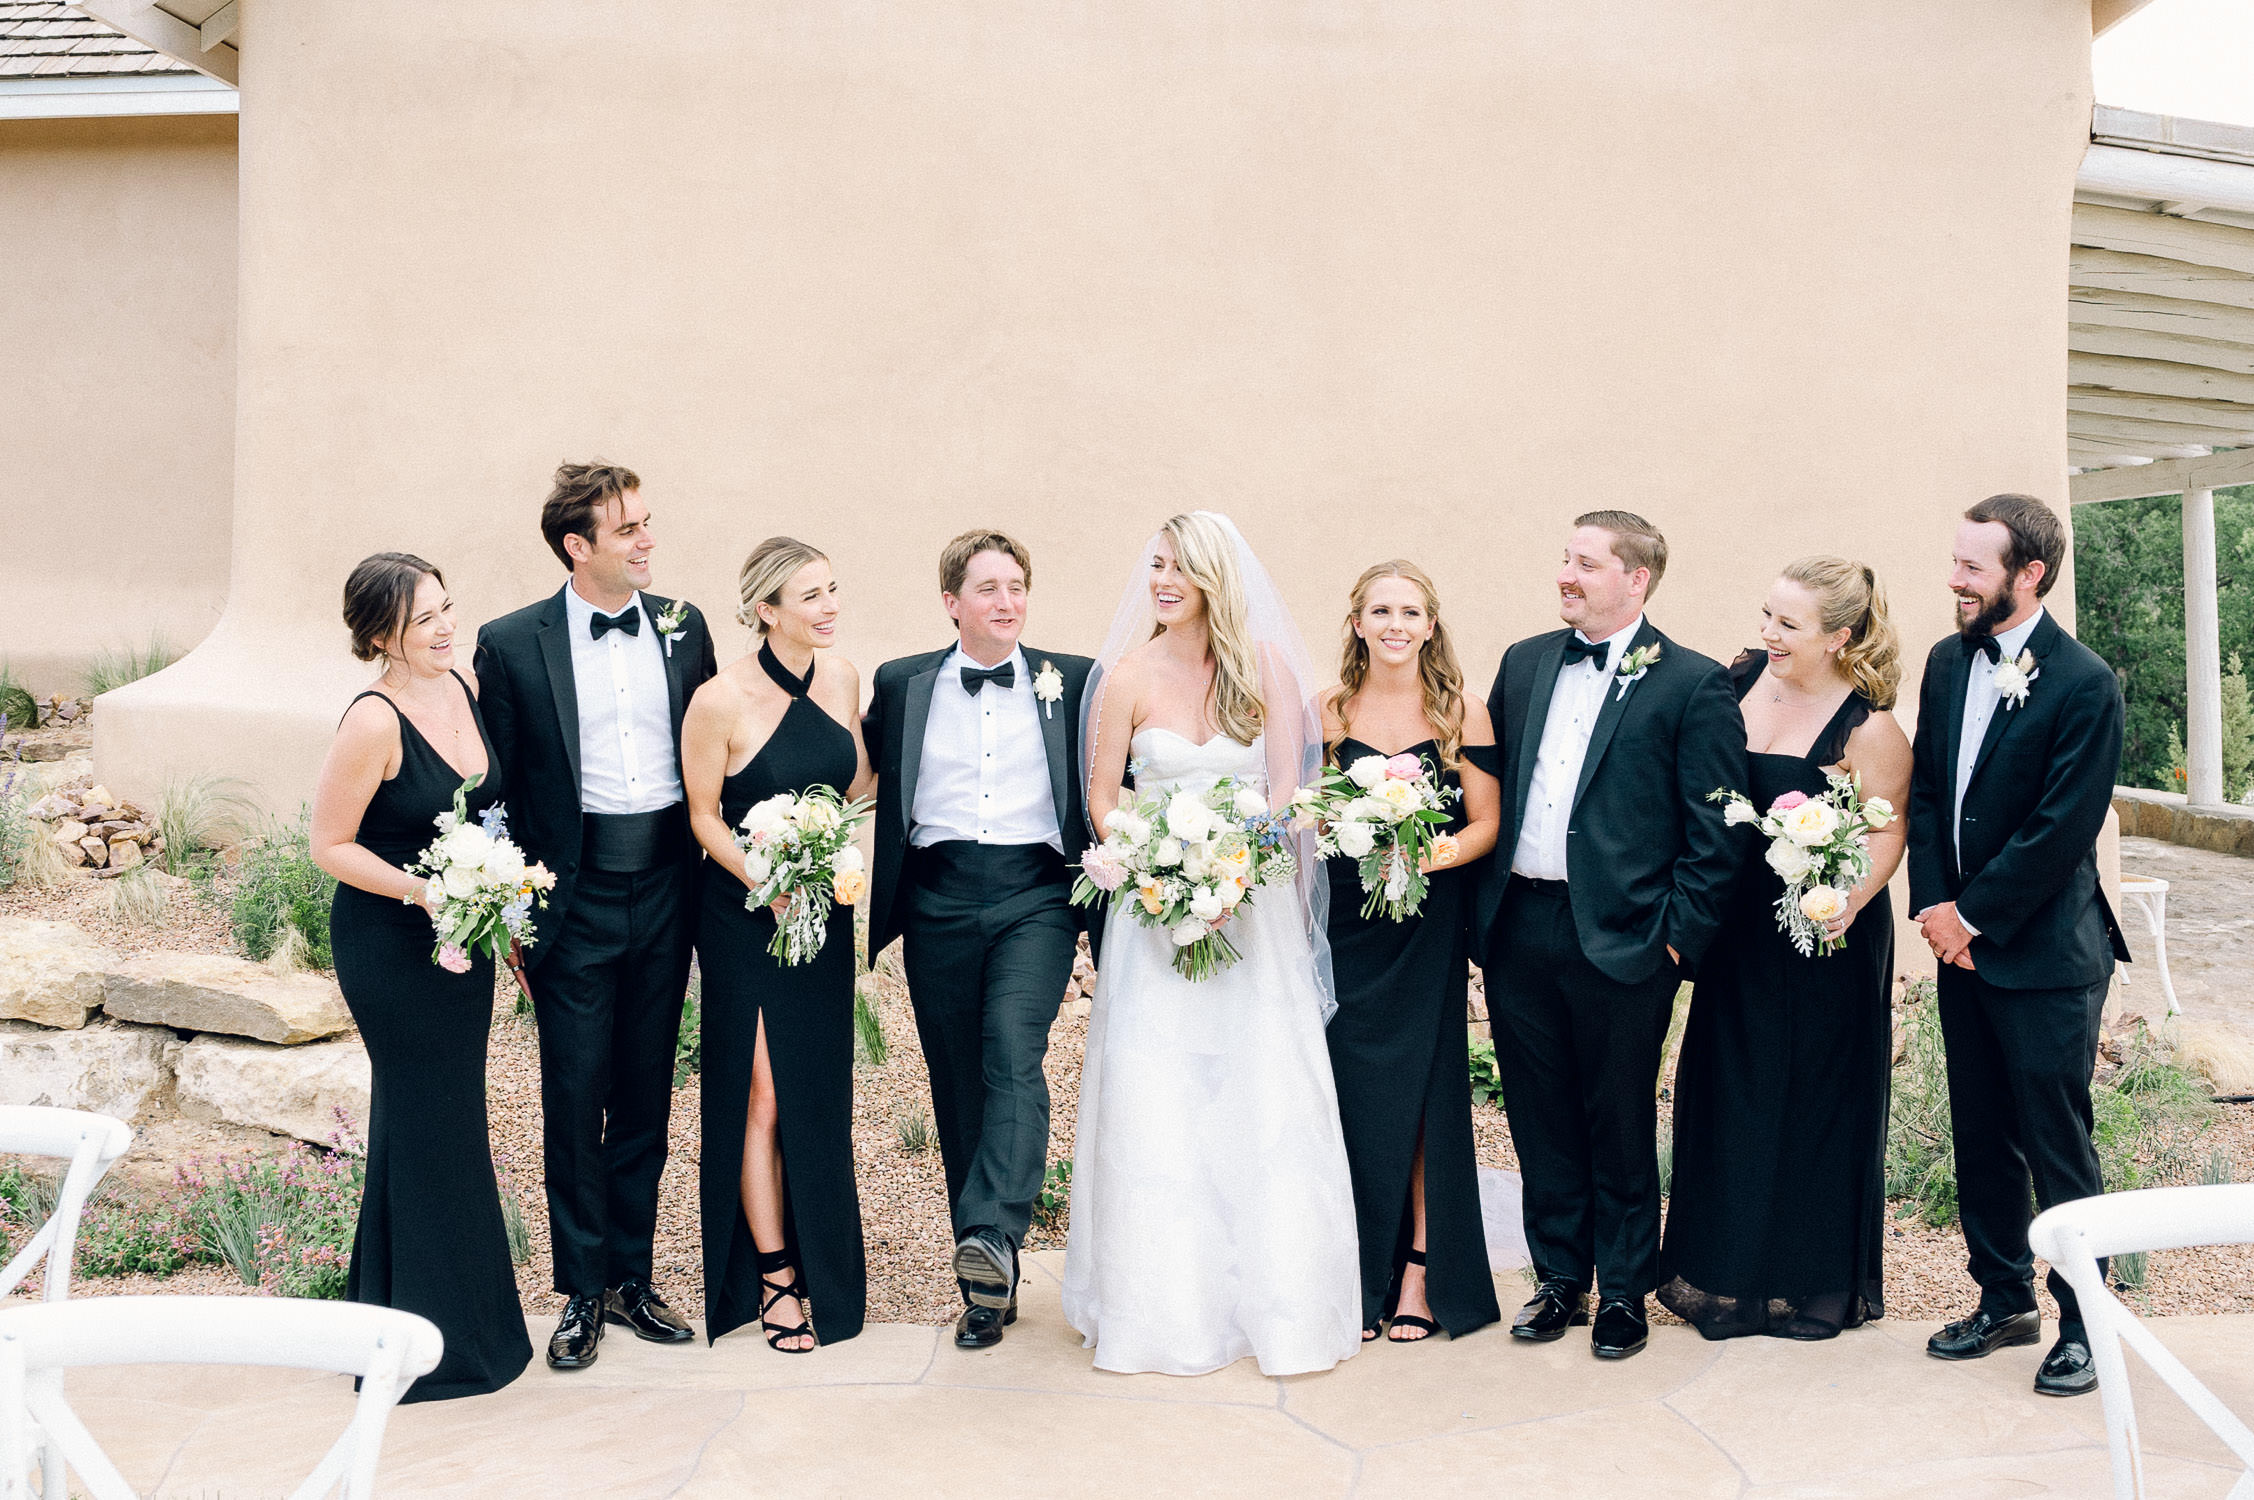 Candid wedding party photo in front of the chapel at Bishop's Lodge in Santa Fe.